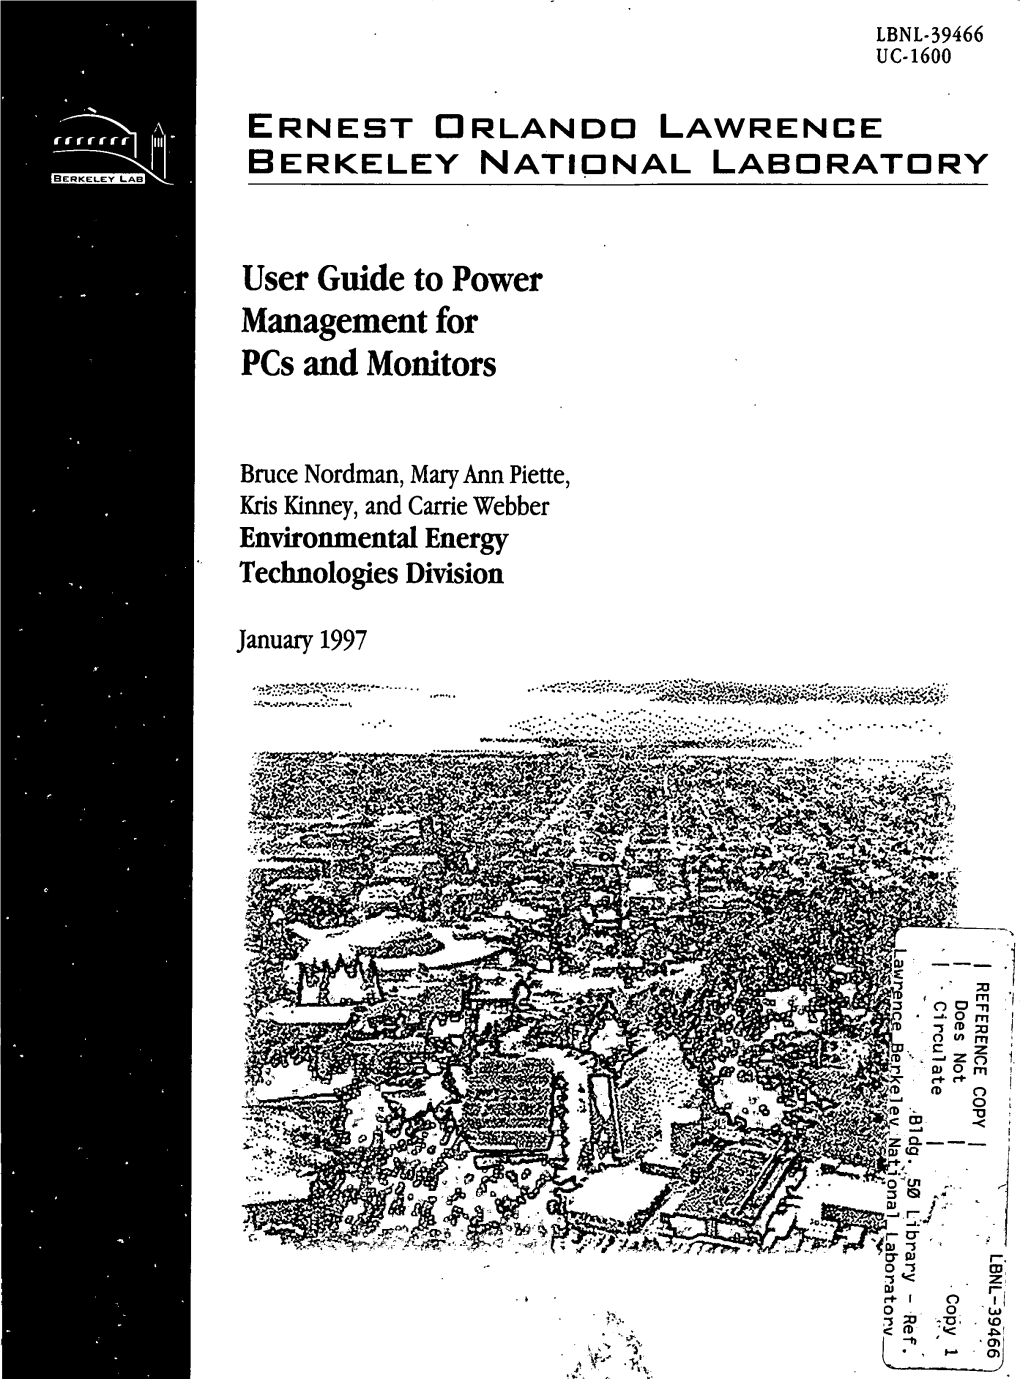 User Guide to Power Management for Pcs and Monitors